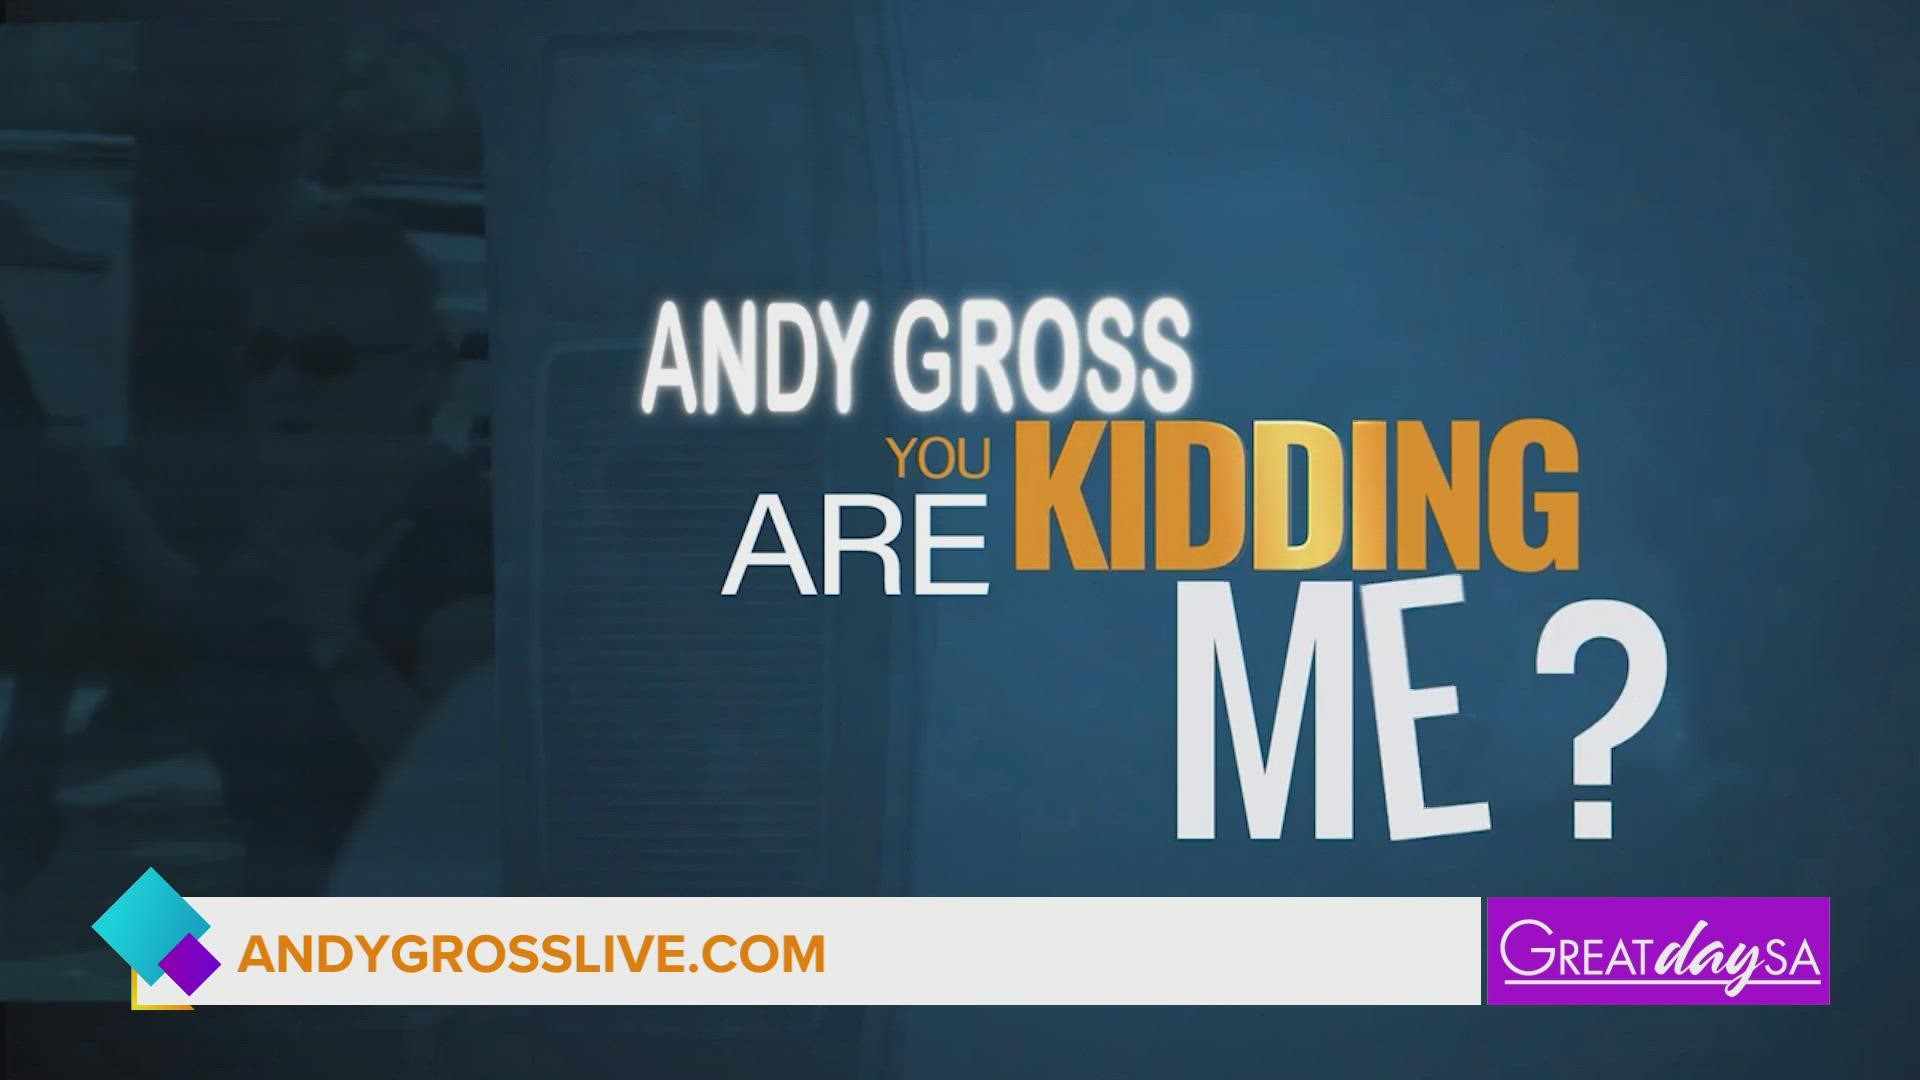 'Andy Gross are you Kidding Me?" features new Andy Gross prank videos on YouTube